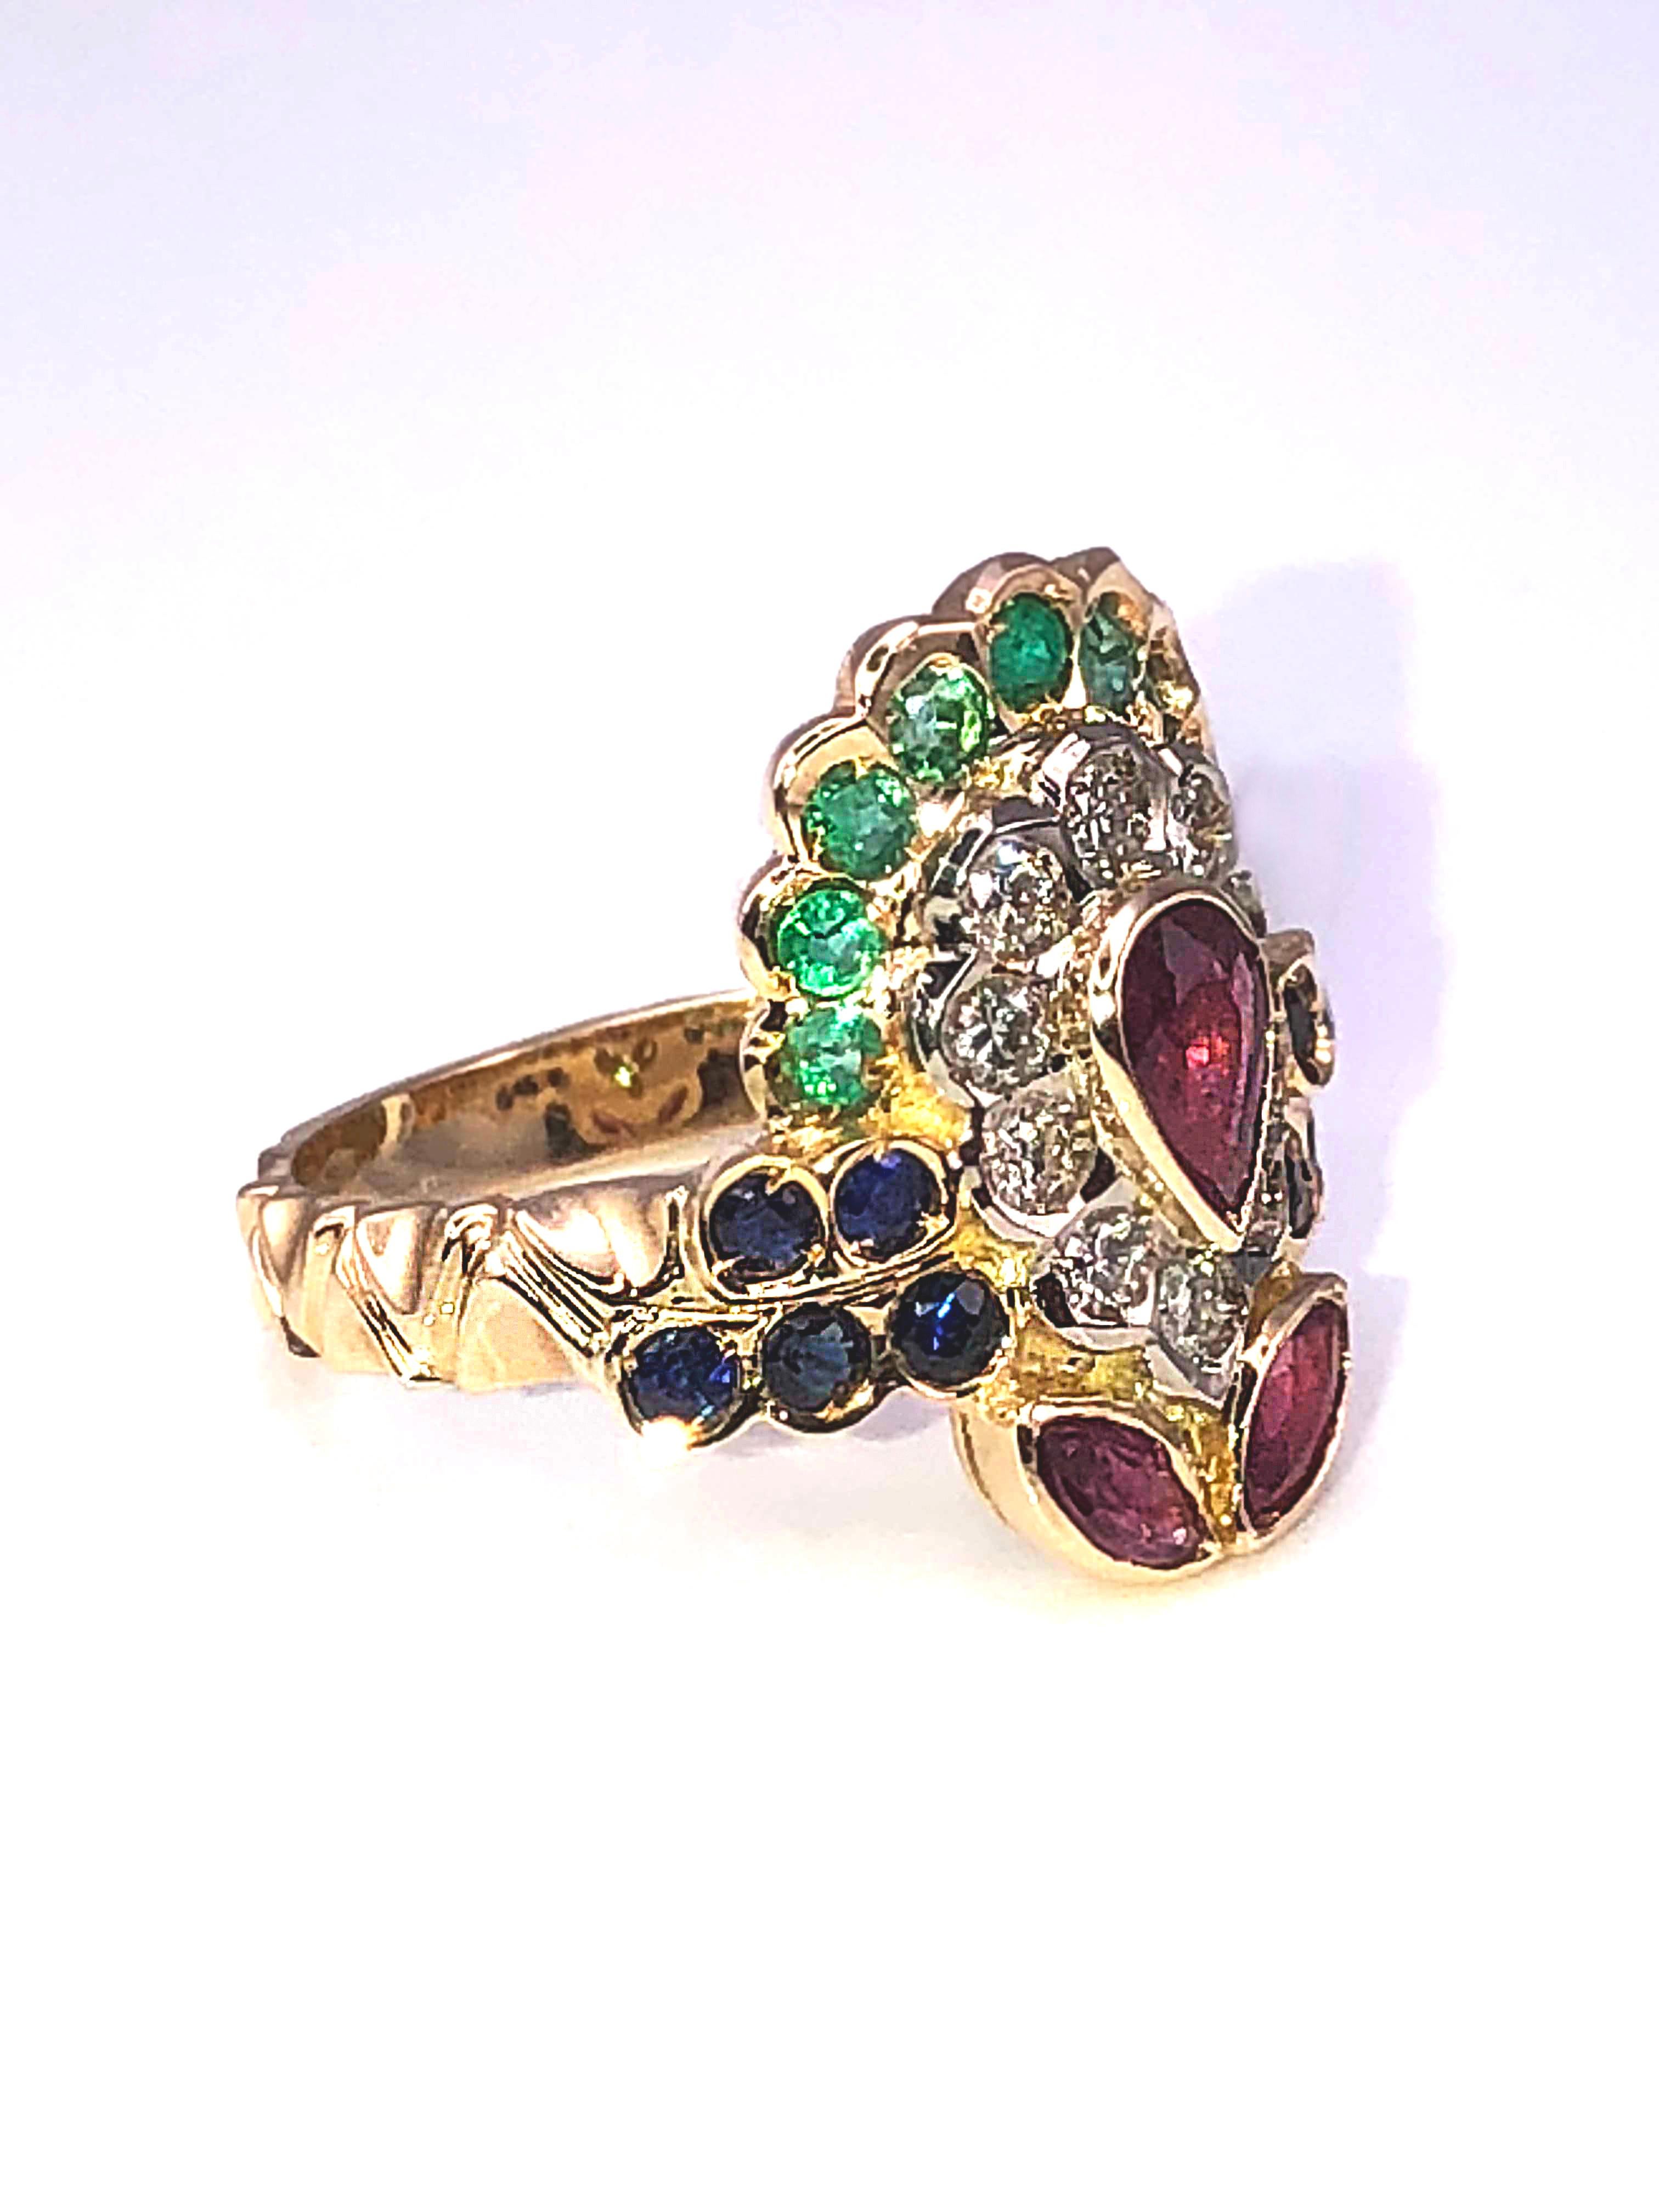 S.Georgios design multicolor ring handmade from solid 18 Karat Yellow Gold. This Multicolour Byzantine style ring features 10 Brilliant cut Diamonds in a total weight of 0.32 Carat, center Pear Shape Ruby, 2 Marquize Cut Rubies,  10 Brilliant Cut